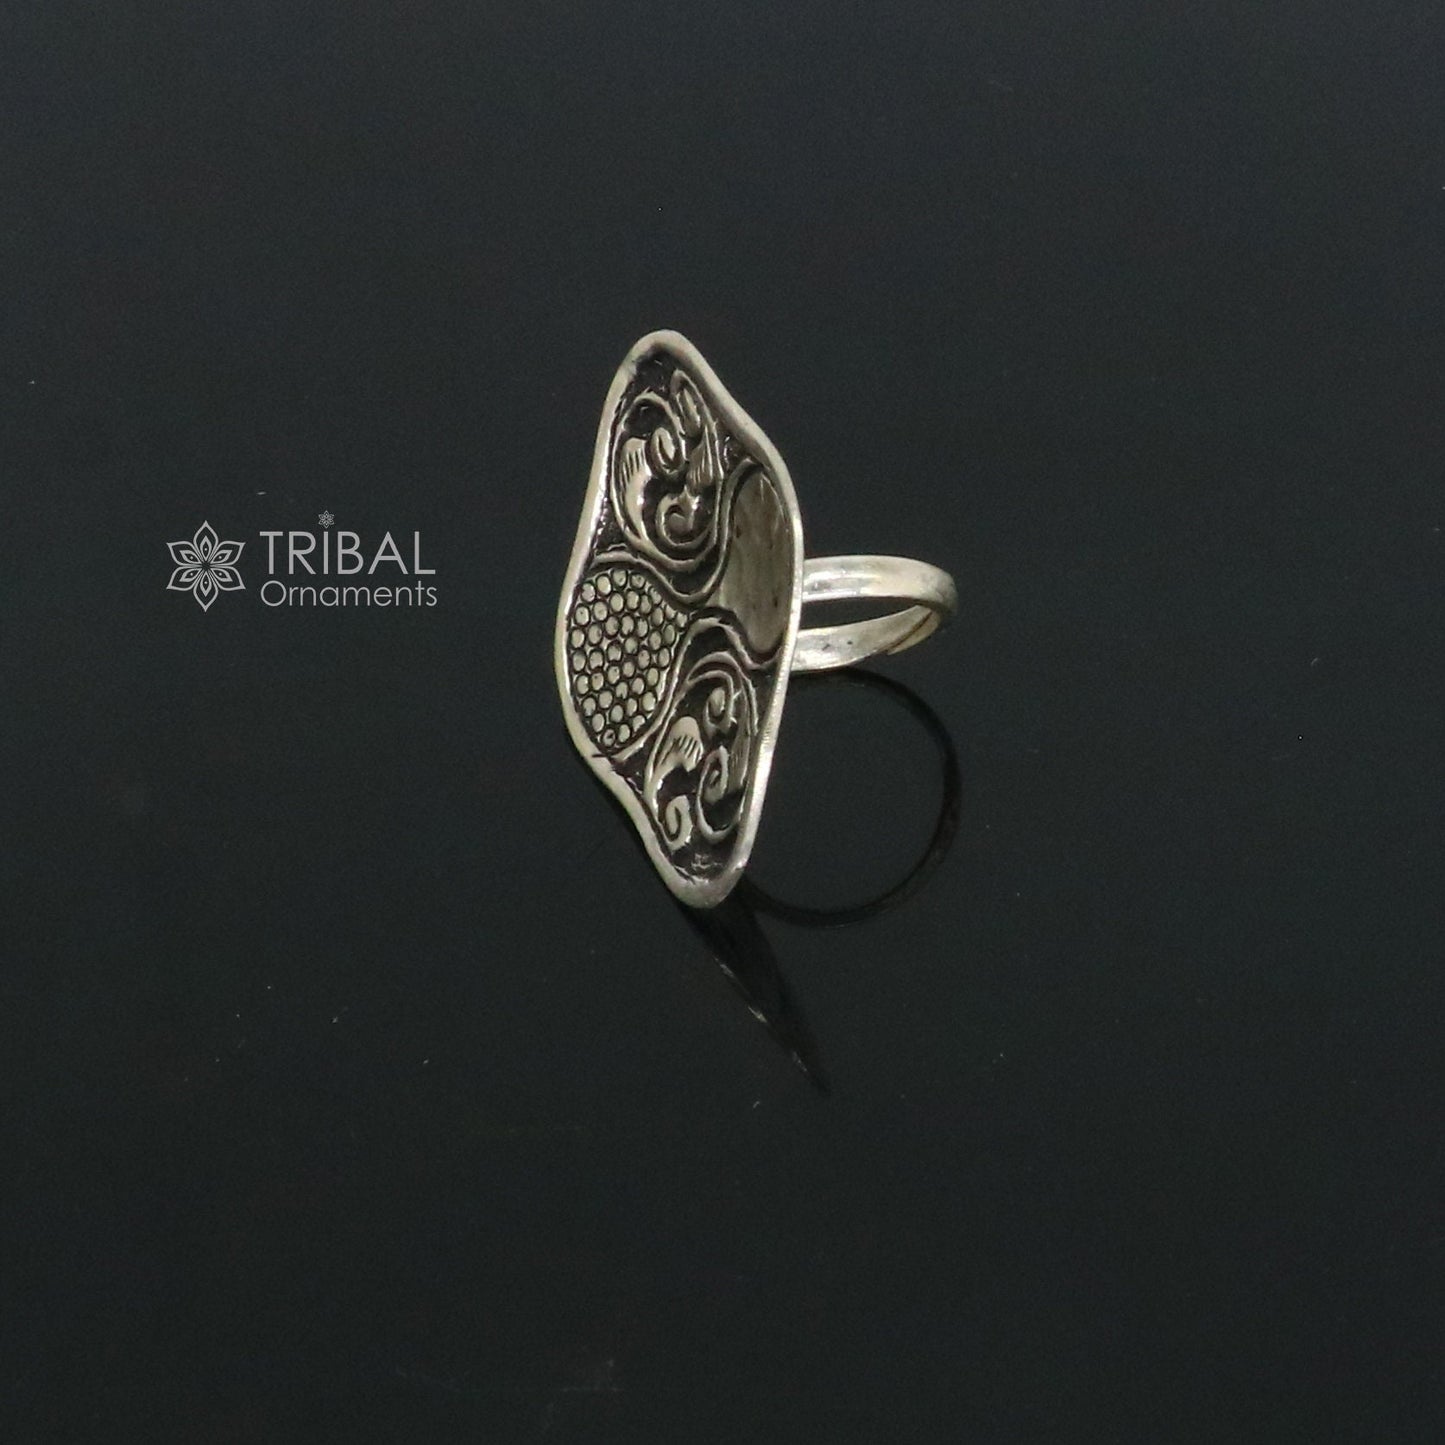 Indian Classical cultural flower design 925 sterling silver adjustable ring, best tribal ethnic jewelry Navratri jewelry sr390 - TRIBAL ORNAMENTS